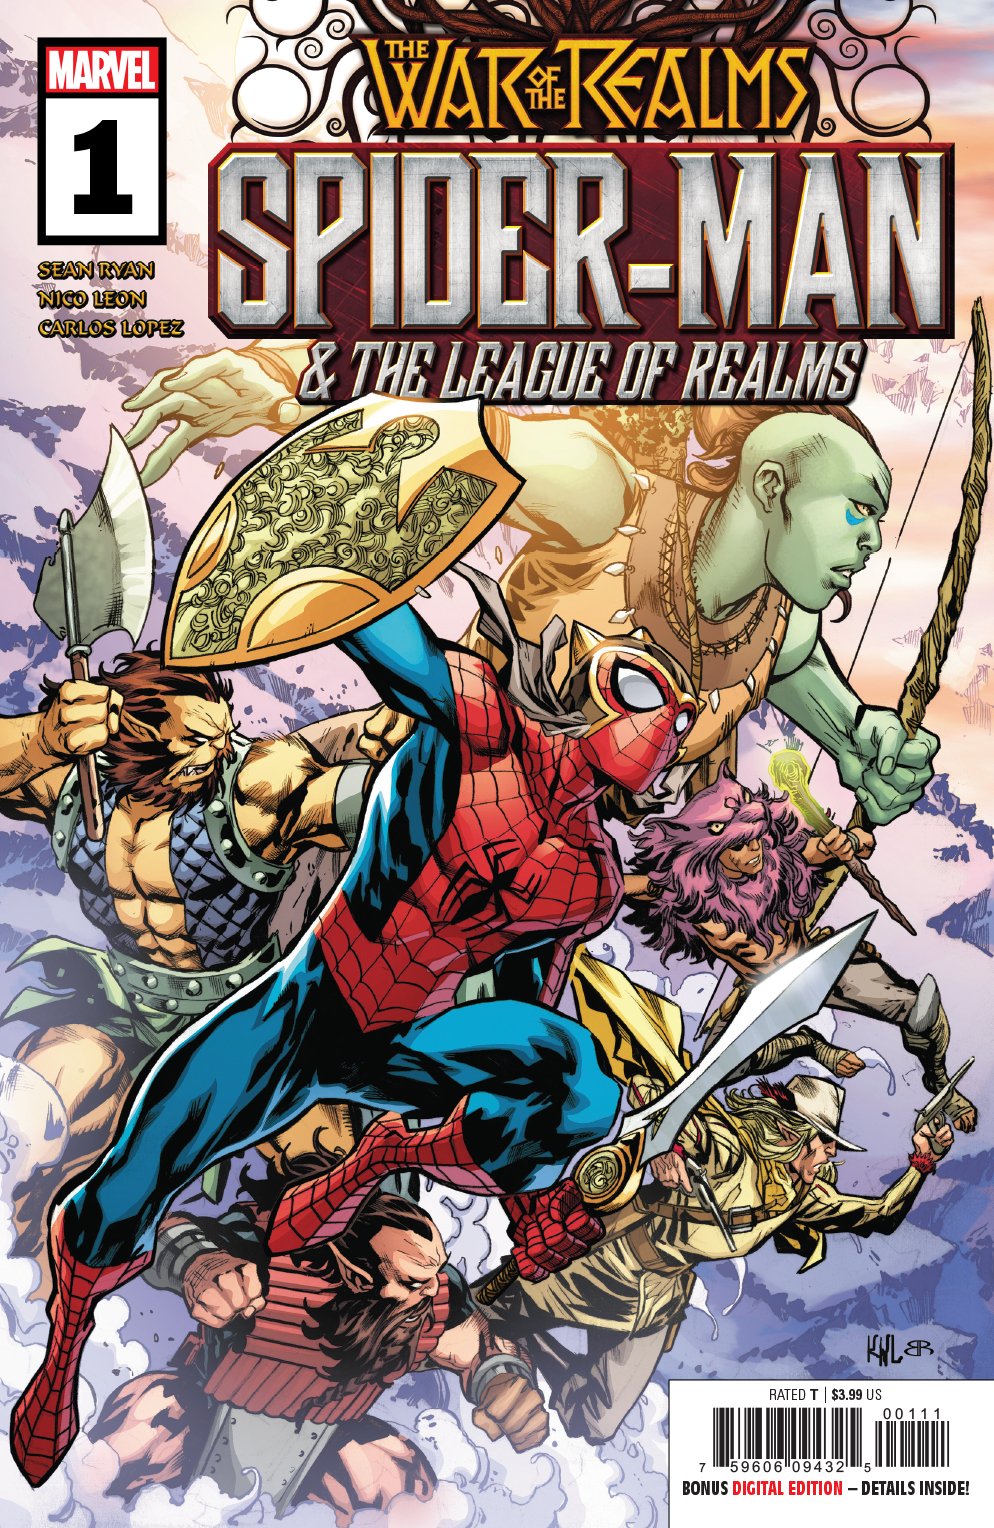 War of the Realms: Spider-Man and the League of Realms no. 1 (2019 Series)